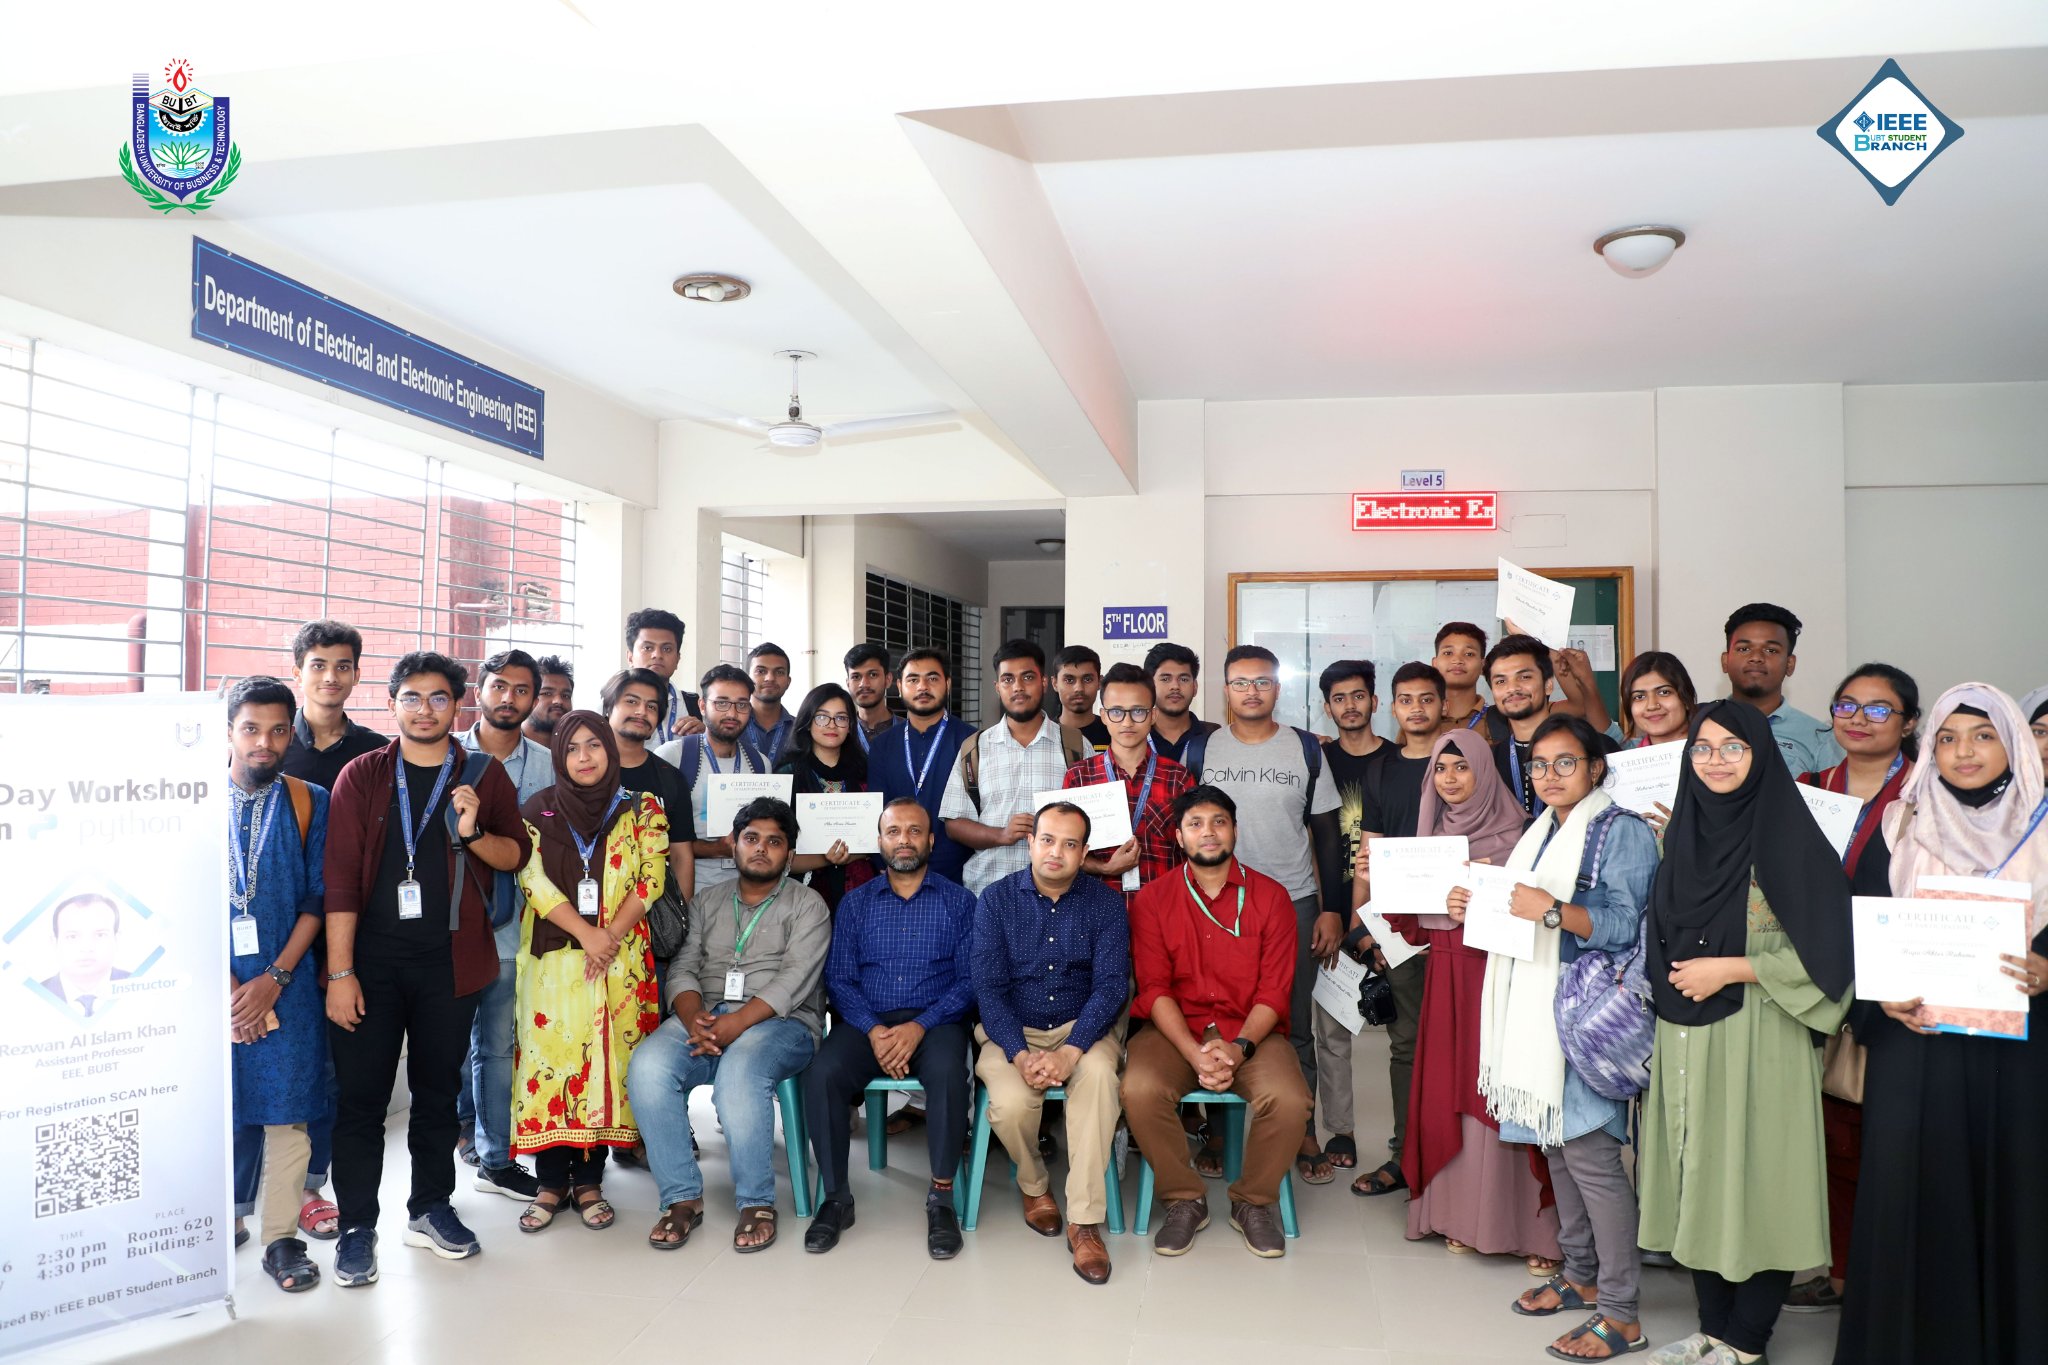 𝟯-𝗗𝗮𝘆𝘀 𝗪𝗼𝗿𝗸𝘀𝗵𝗼𝗽 𝗼𝗻 𝗣𝘆𝘁𝗵𝗼𝗻 from 24 May- 26 May (Certificate Distribution)